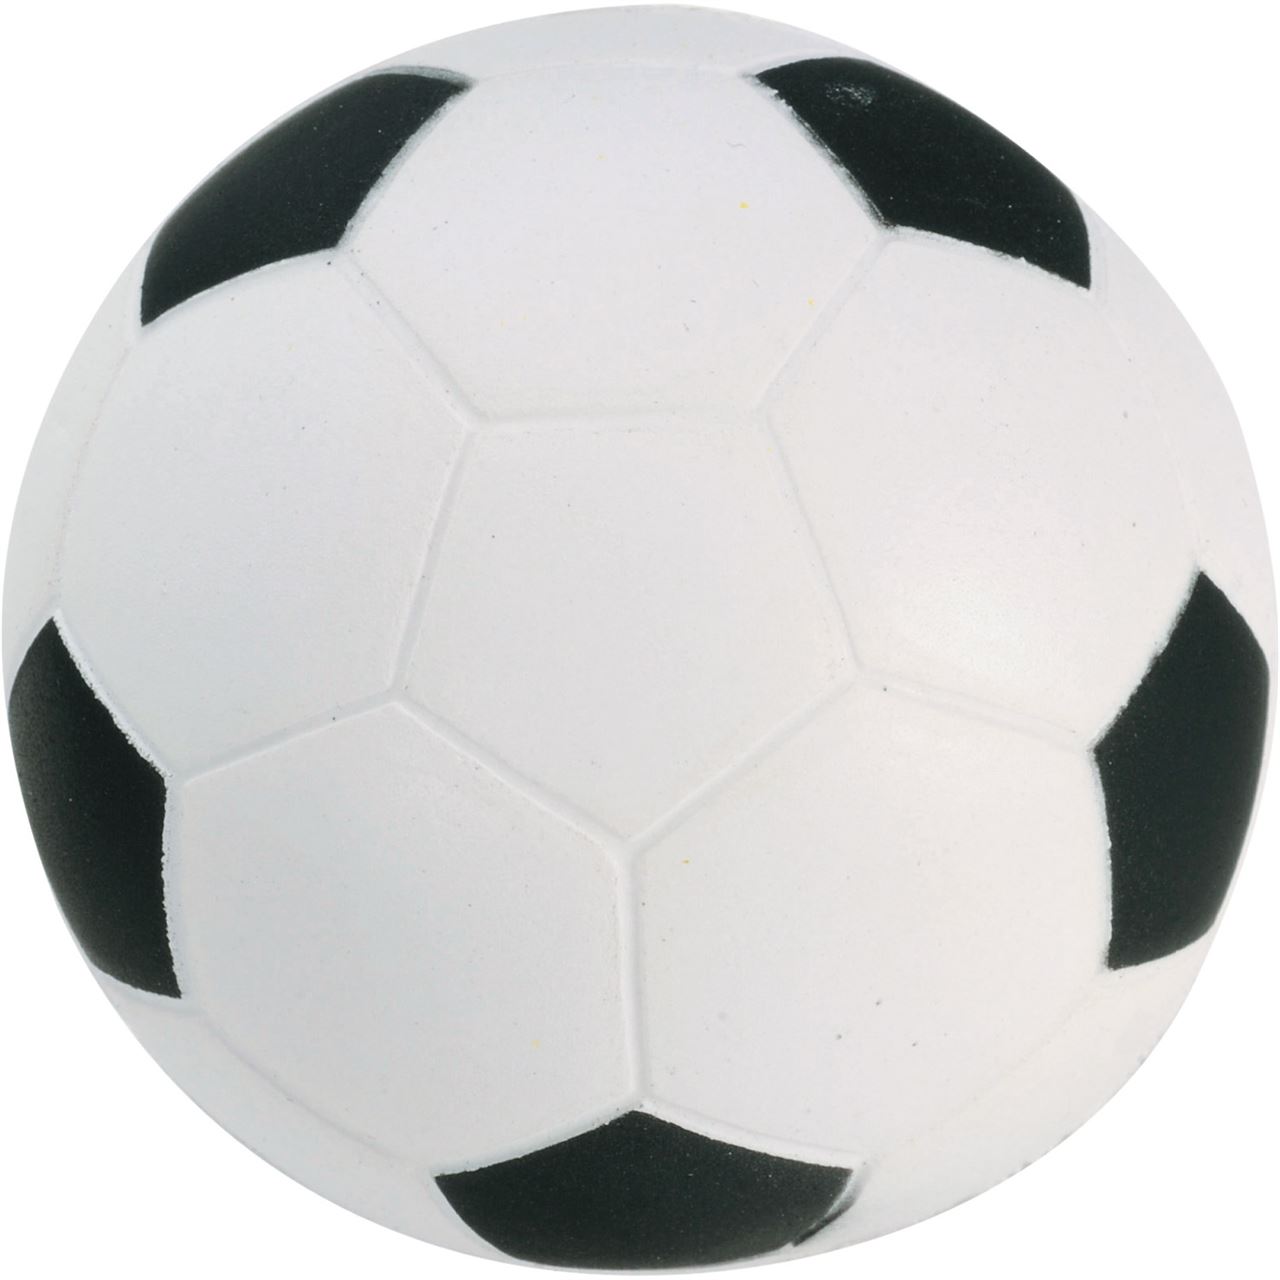 Picture of Bullet Soccer Ball Stress Reliever